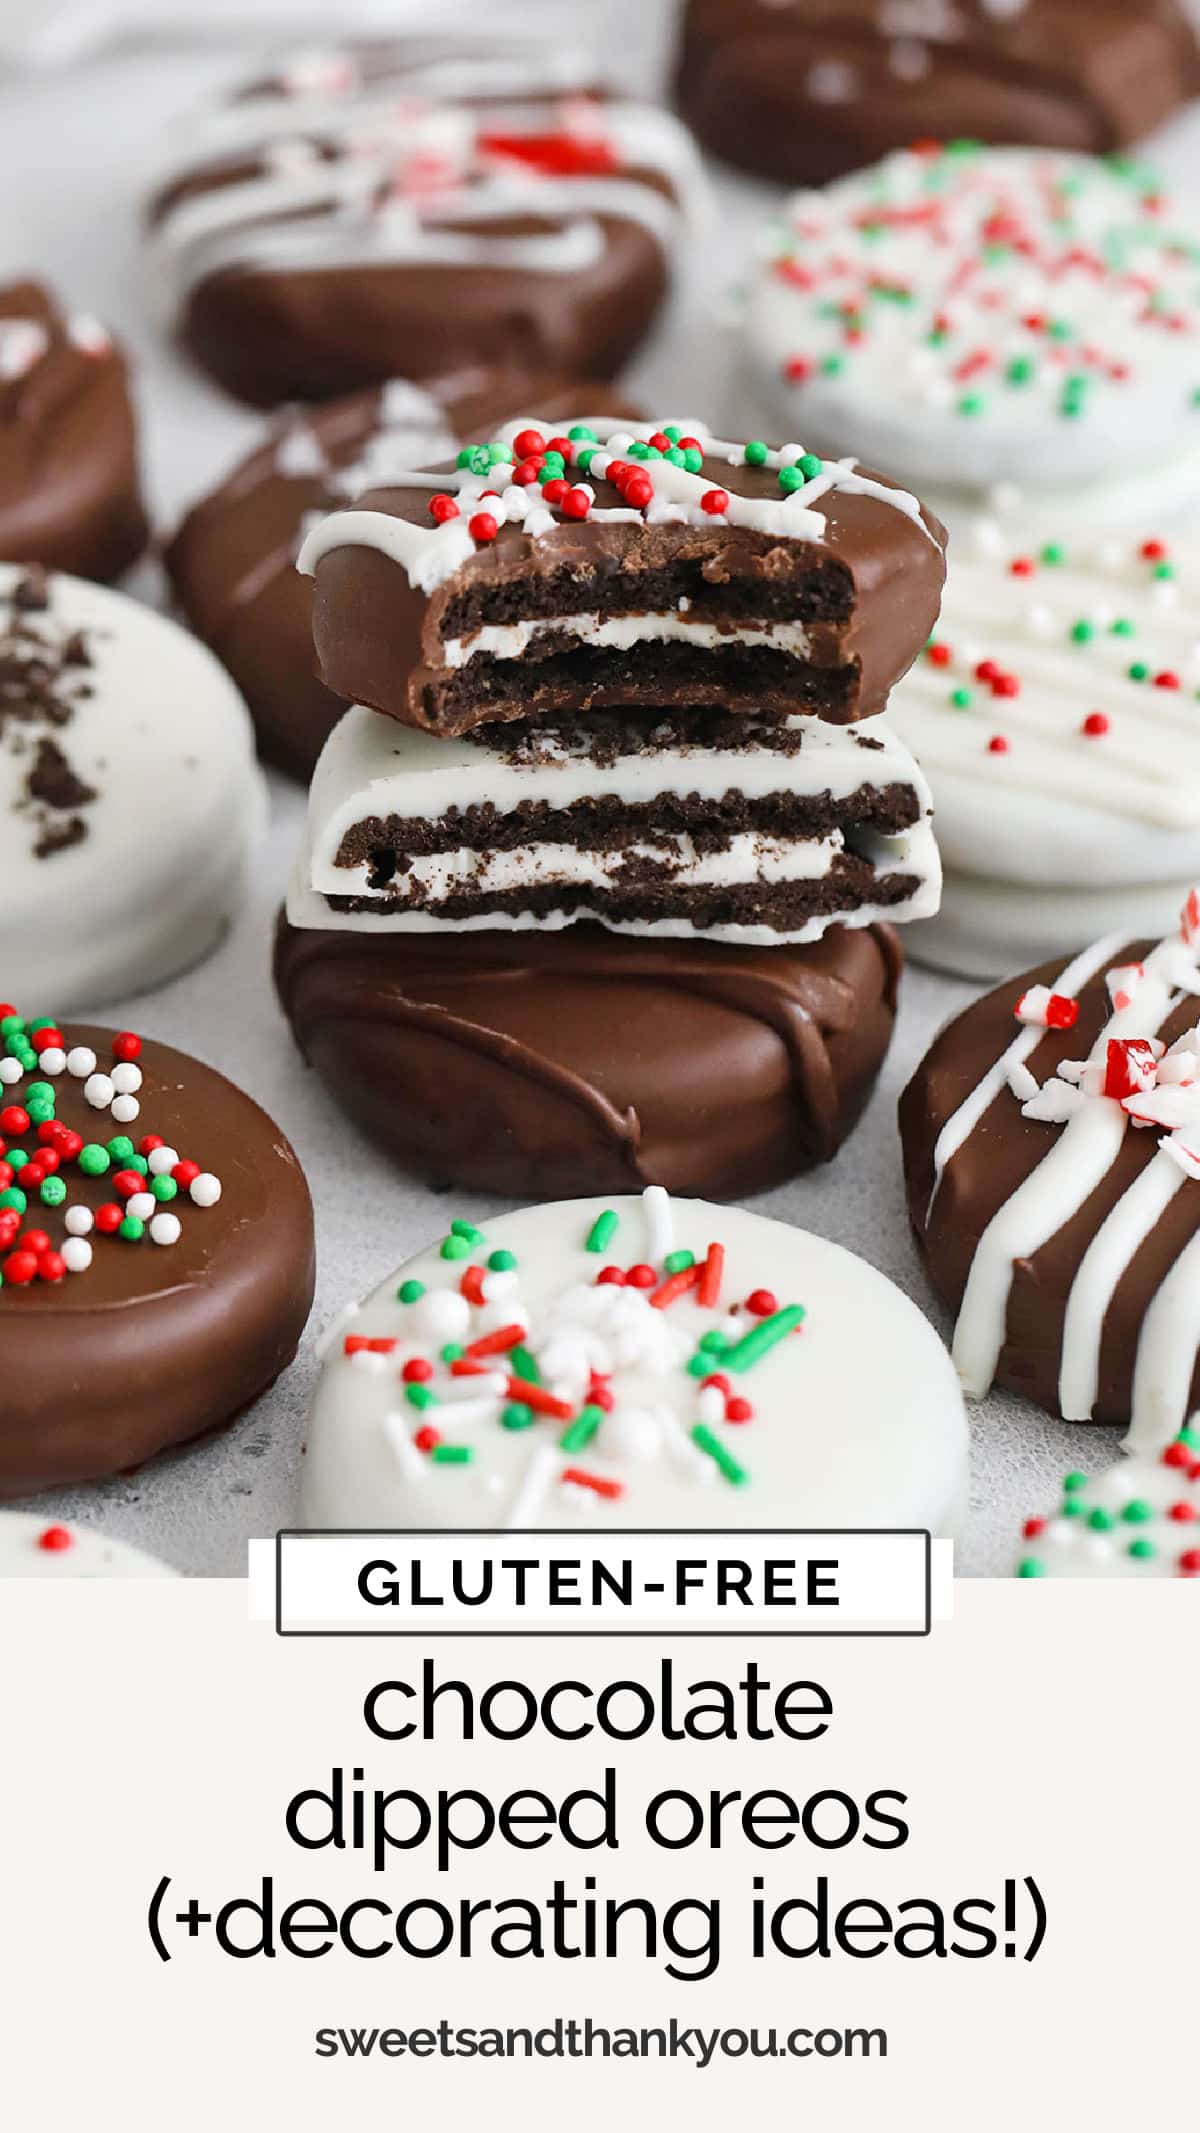 These easy (gluten-free!) chocolate covered Oreos are a fun no-bake holiday treat everyone LOVES! (Don't miss all our cute decorating ideas!) These easy chocolate dipped Oreos make such a cute addition to holiday treat plates or cookie exchanges. They're the perfect EASY holiday recipe to try this year!